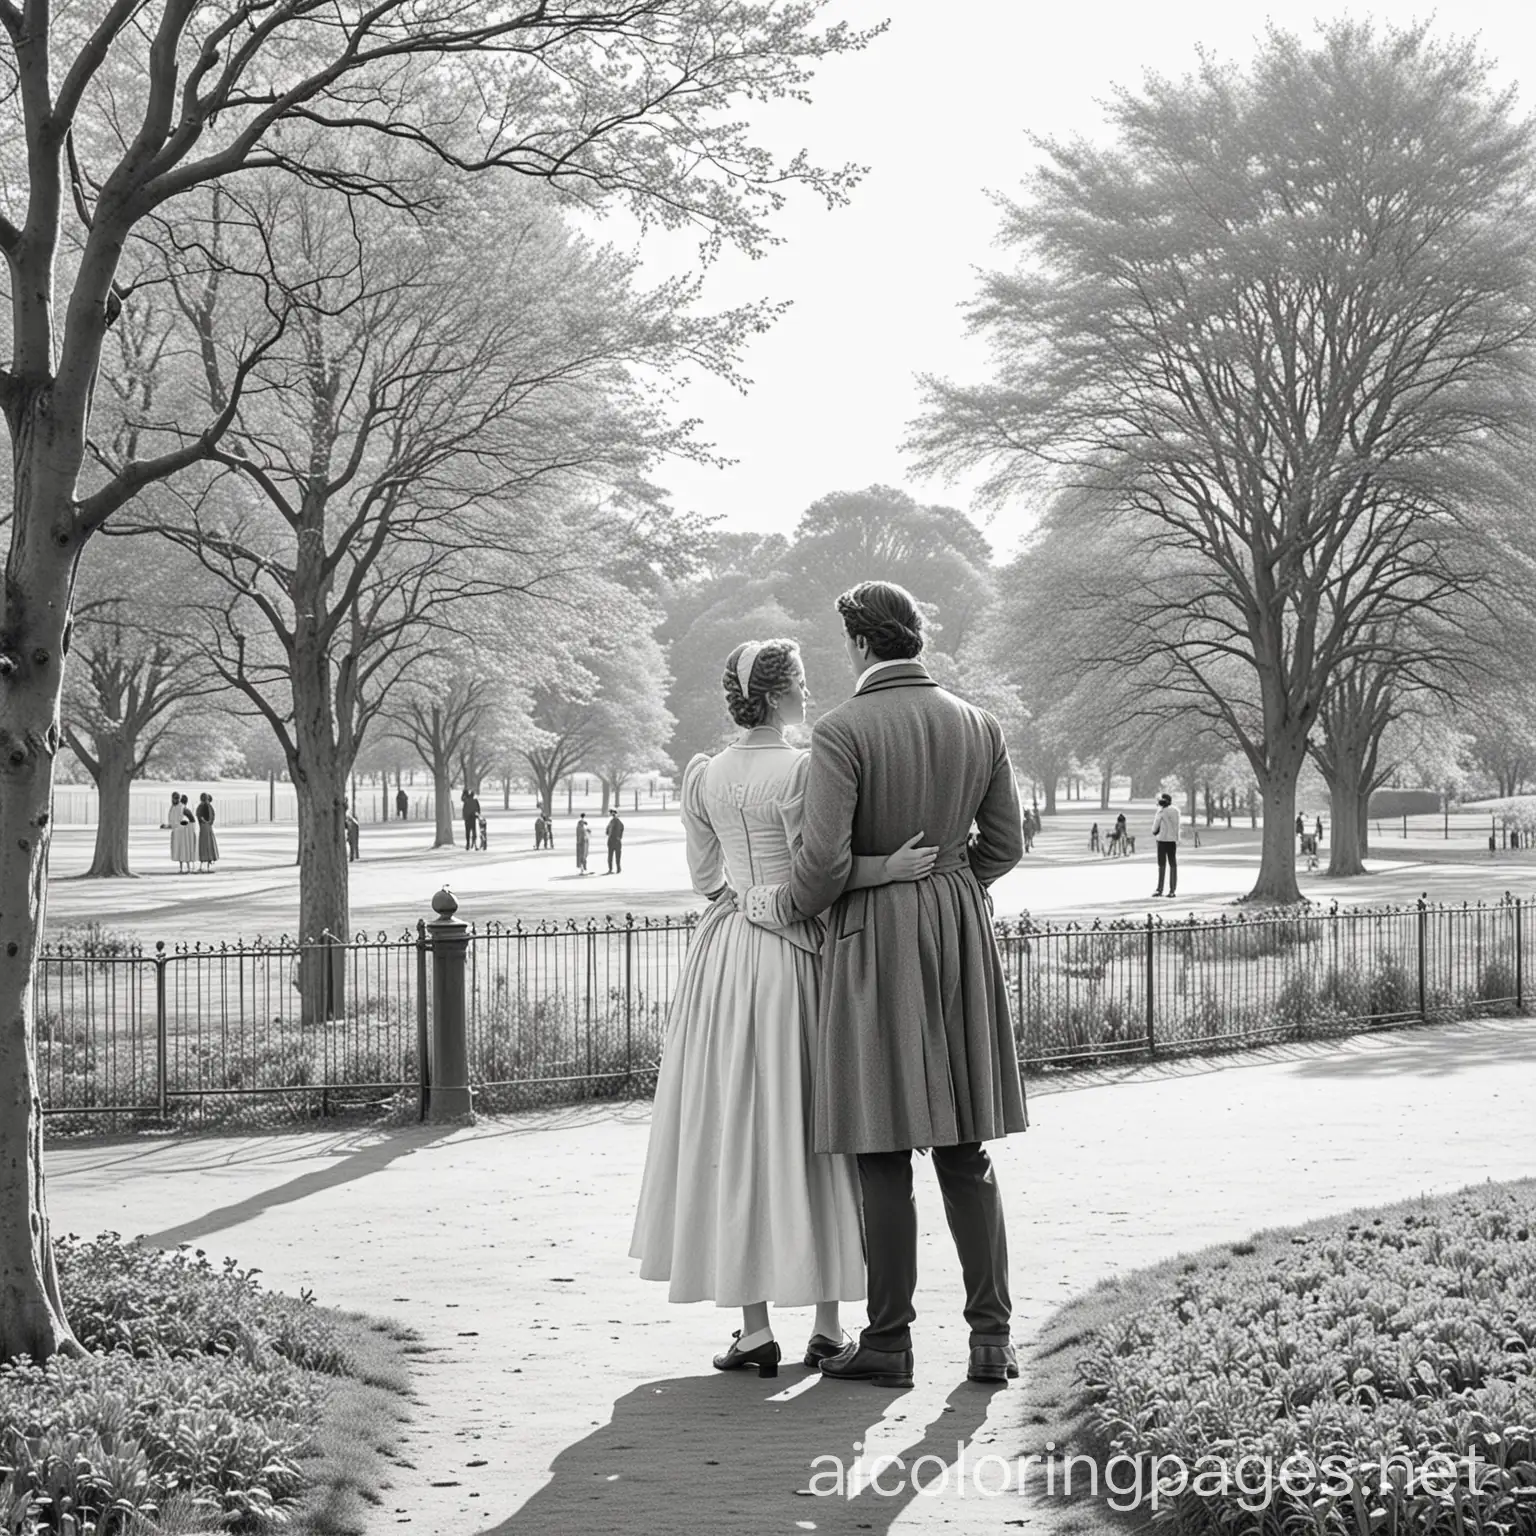 black and white outline of a couple standing in a park talking to each other, set in England in the 1750s, Coloring Page, black and white, line art, white background, Simplicity, Ample White Space. The background of the coloring page is plain white to make it easy for young children to color within the lines. The outlines of all the subjects are easy to distinguish, making it simple for kids to color without too much difficulty